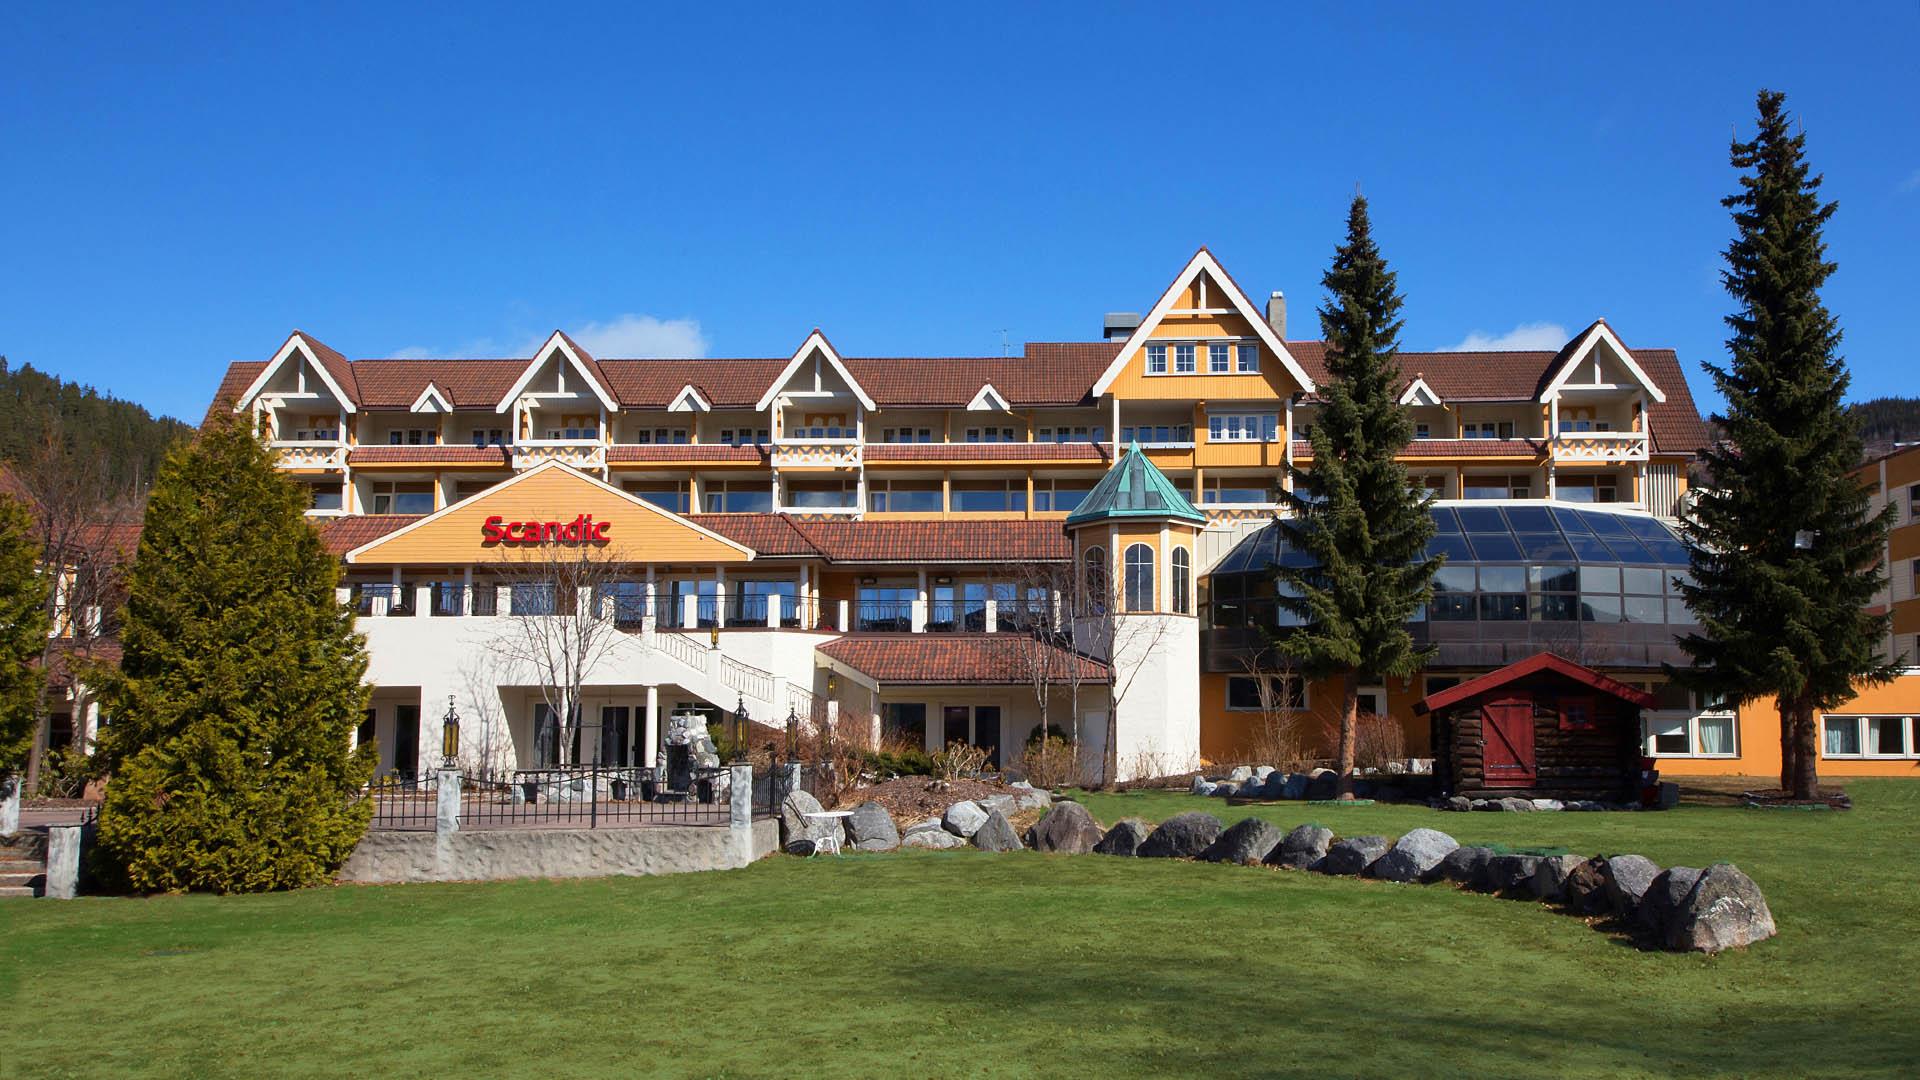 Yellow wooden hotel in swiss style seen from the garden side with lawn and coniferous trees and bushes